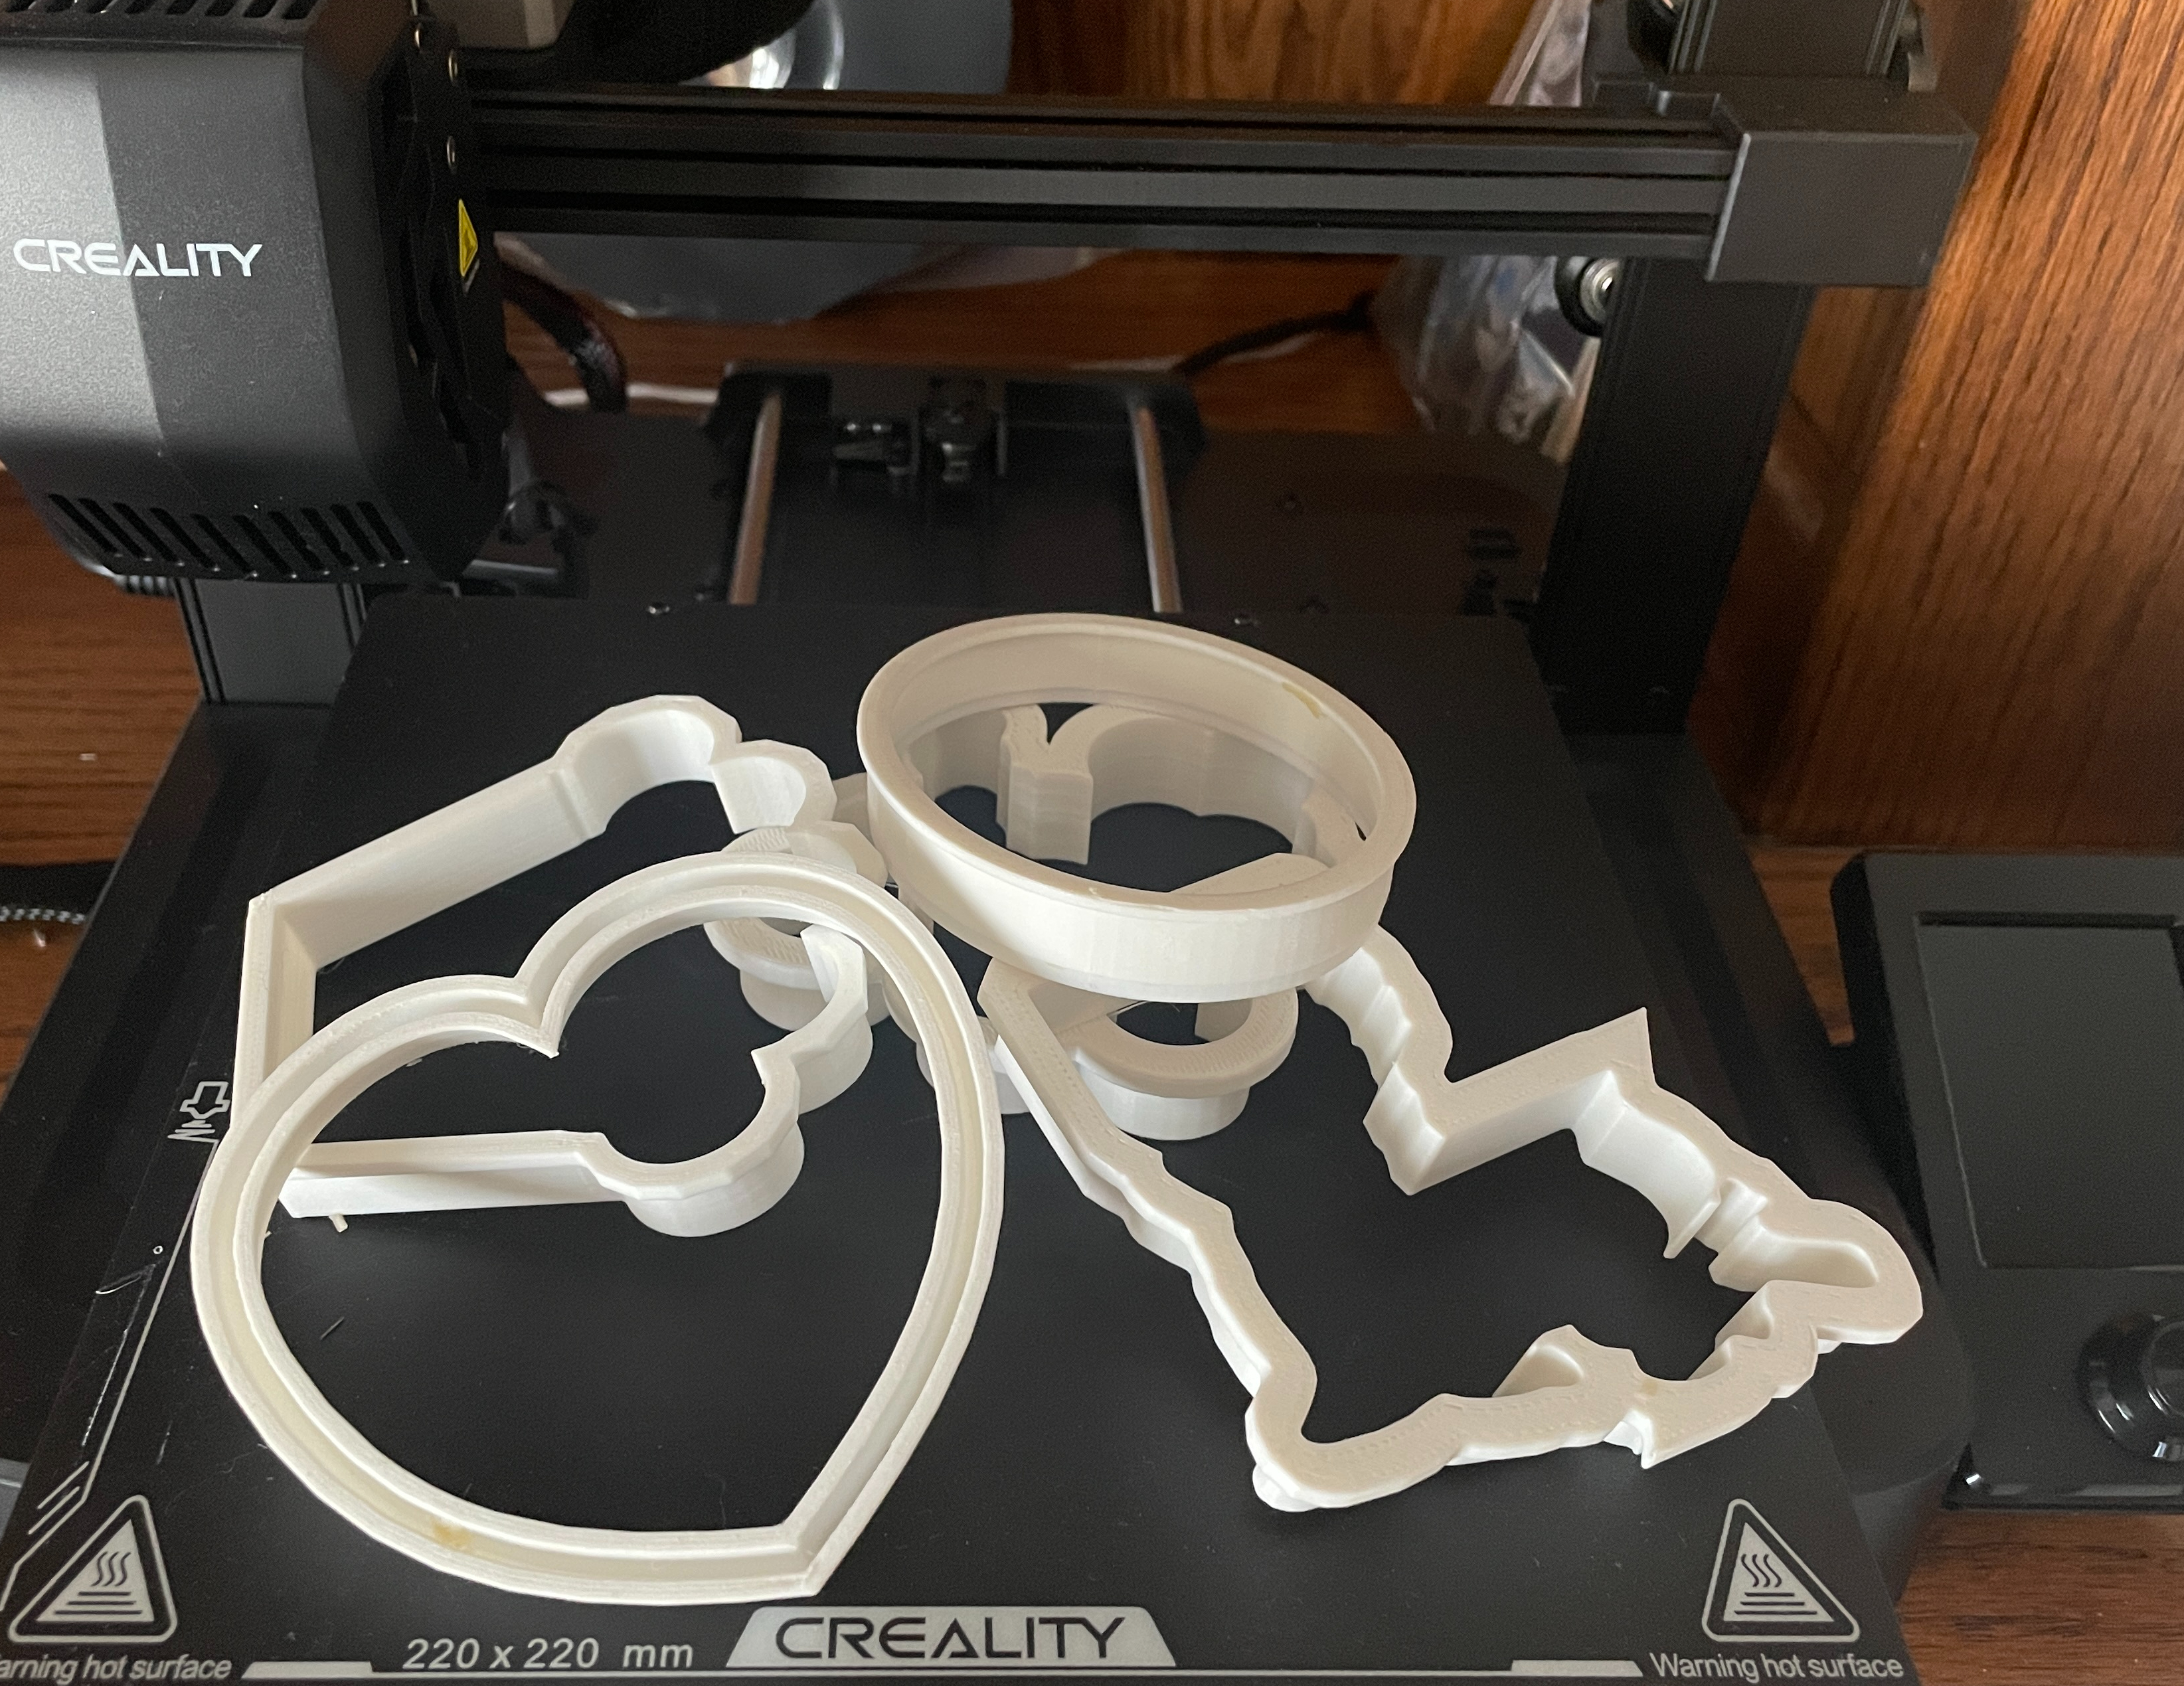 Getting Started with a 3D Printer